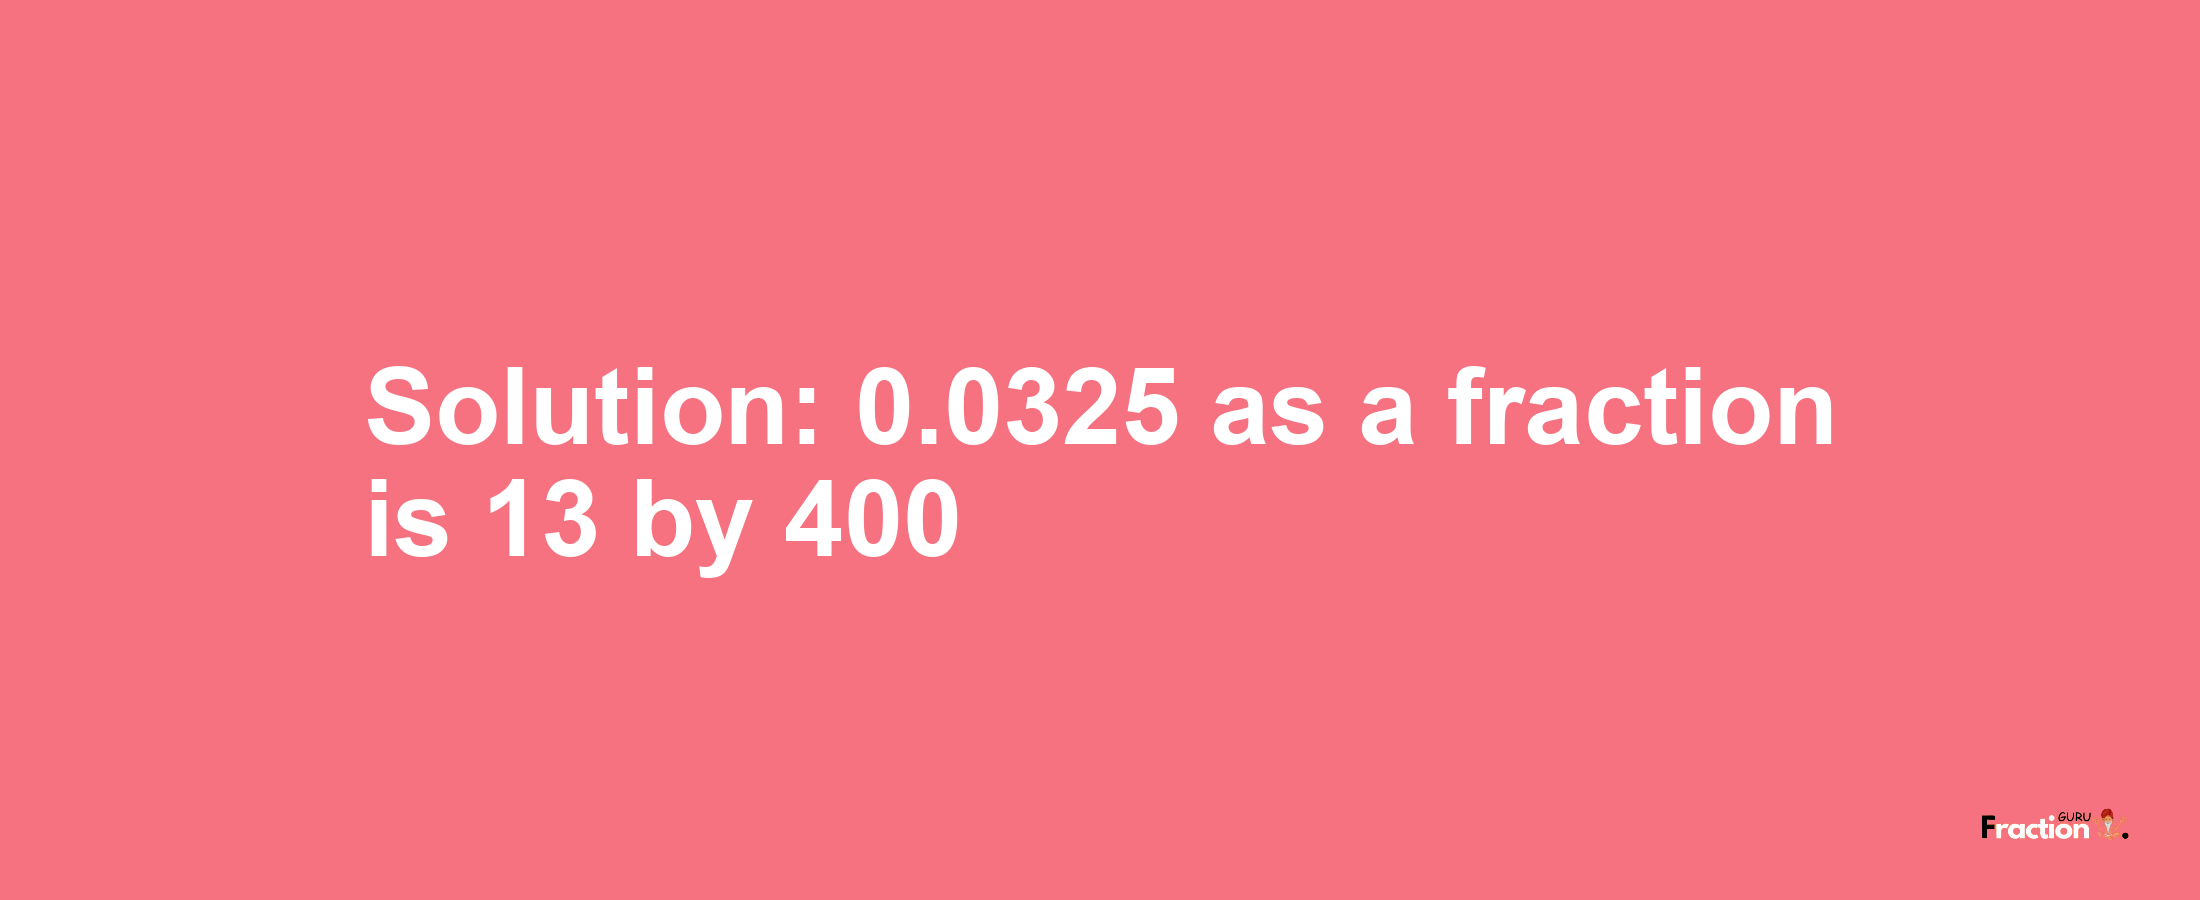 Solution:0.0325 as a fraction is 13/400